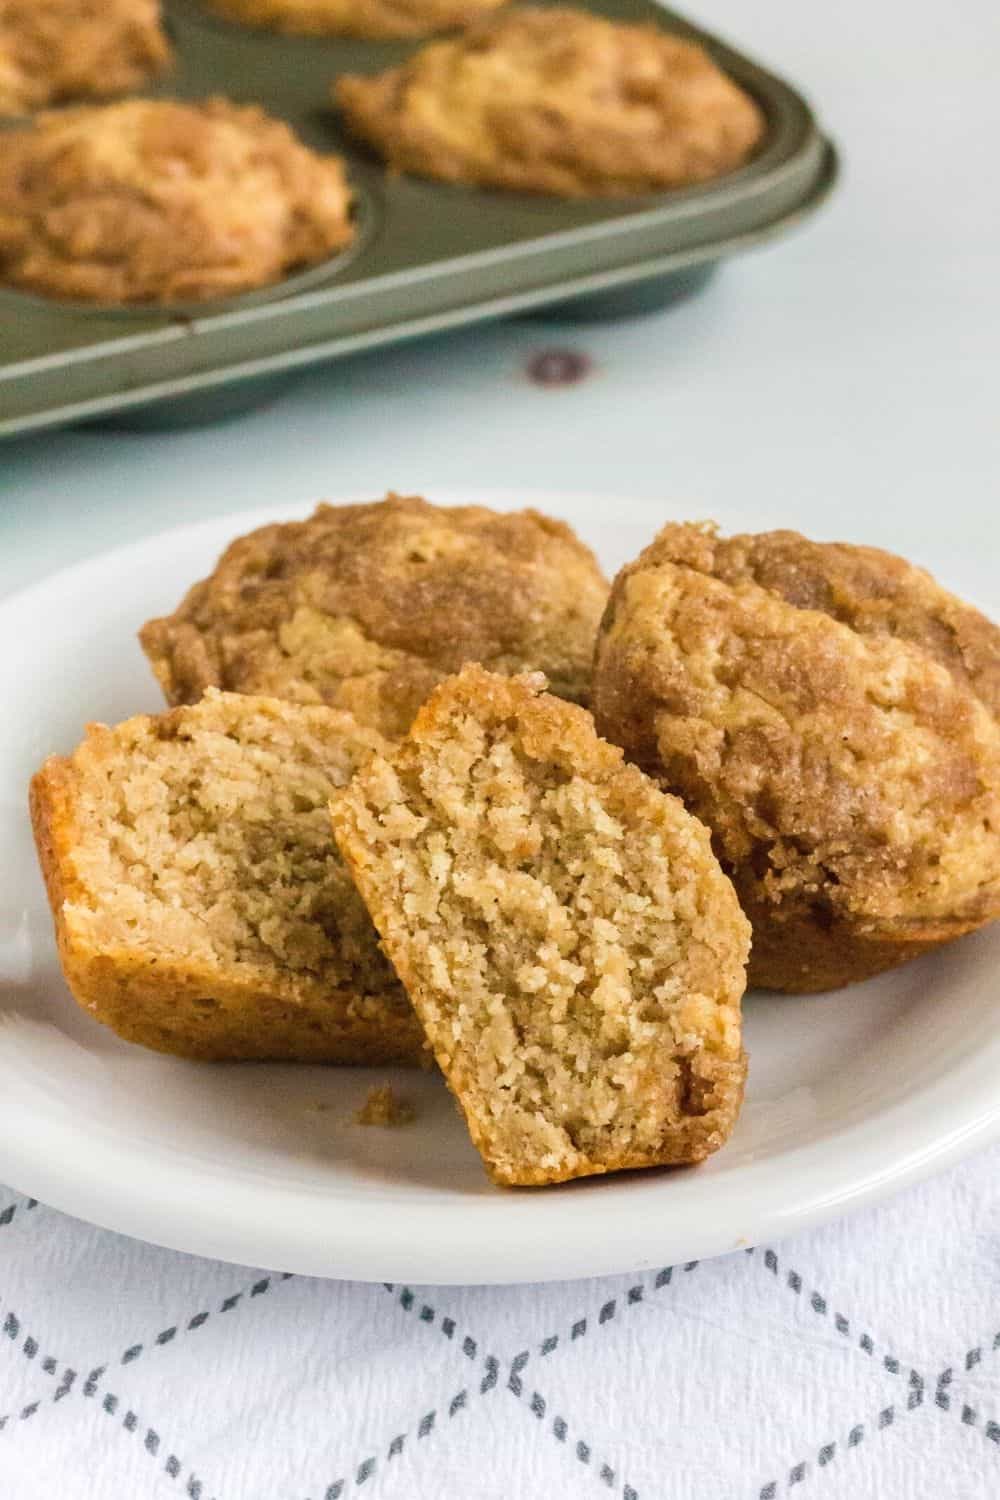 three Bisquick applesauce muffins on a white plate, one of which is cut in half to display the moist interior.